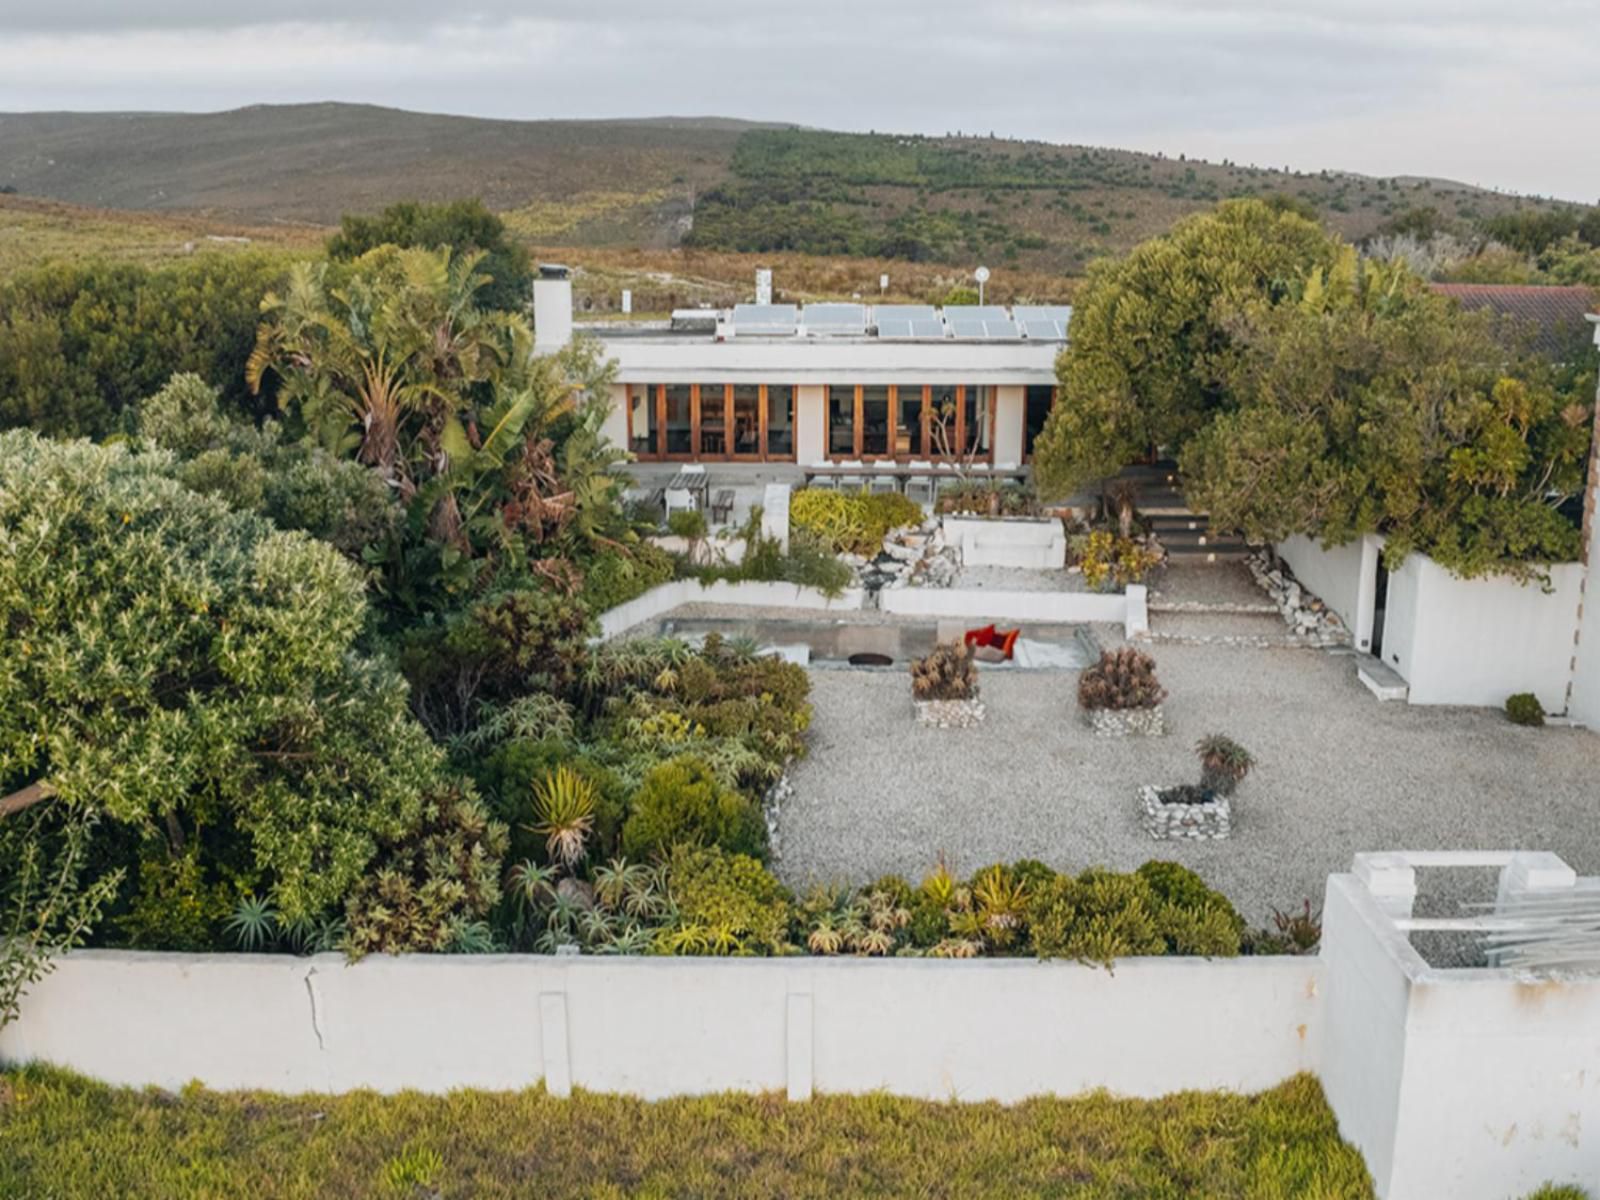 Farm 215 Nature Retreat And Fynbos Reserve Gansbaai Western Cape South Africa House, Building, Architecture